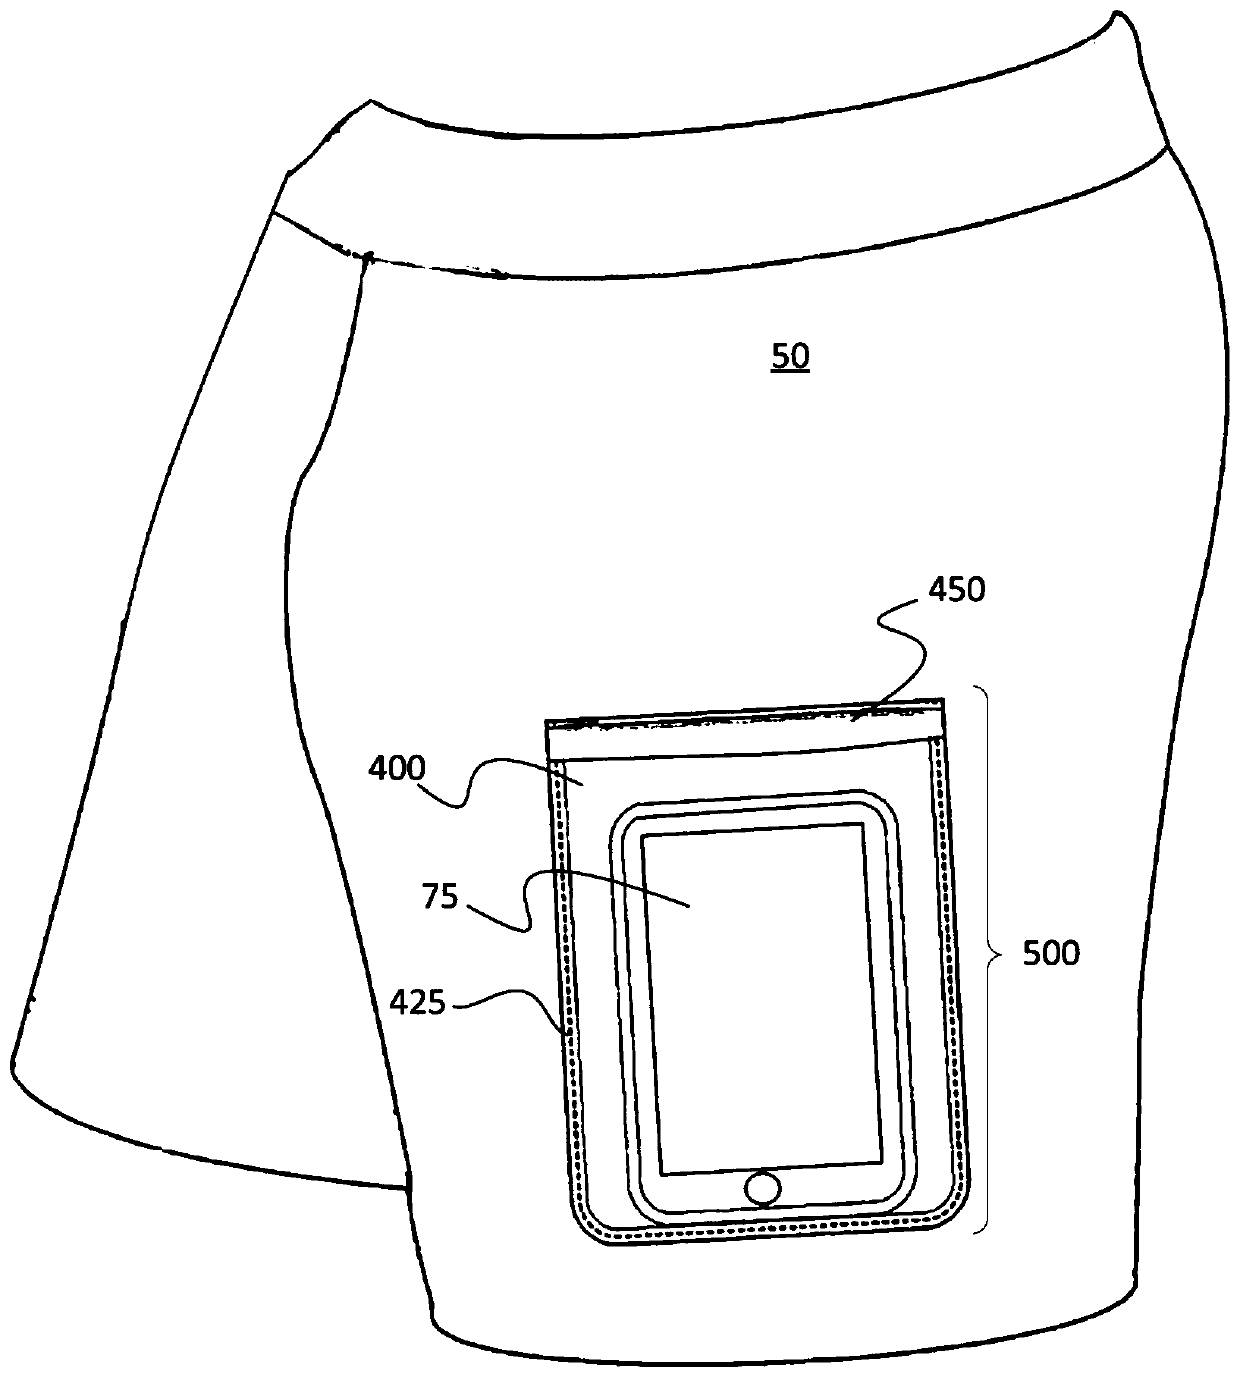 Storage compartment or pocket for electronic devices